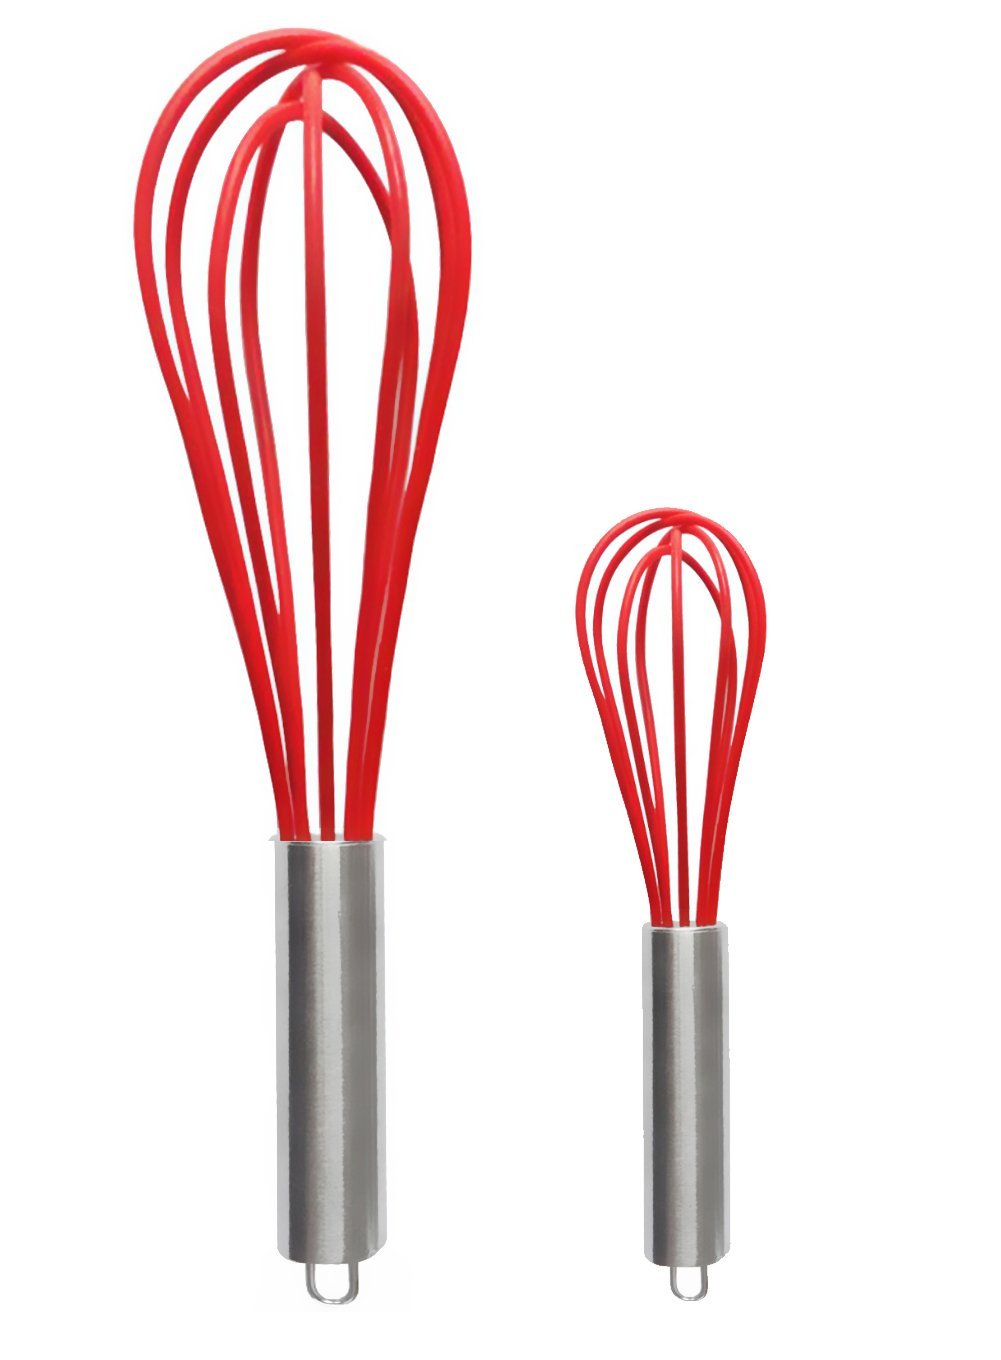 Ouddy 2 Pack Silicone Whisk, Balloon Whisk Set, Egg Frother, Mil - Click Image to Close